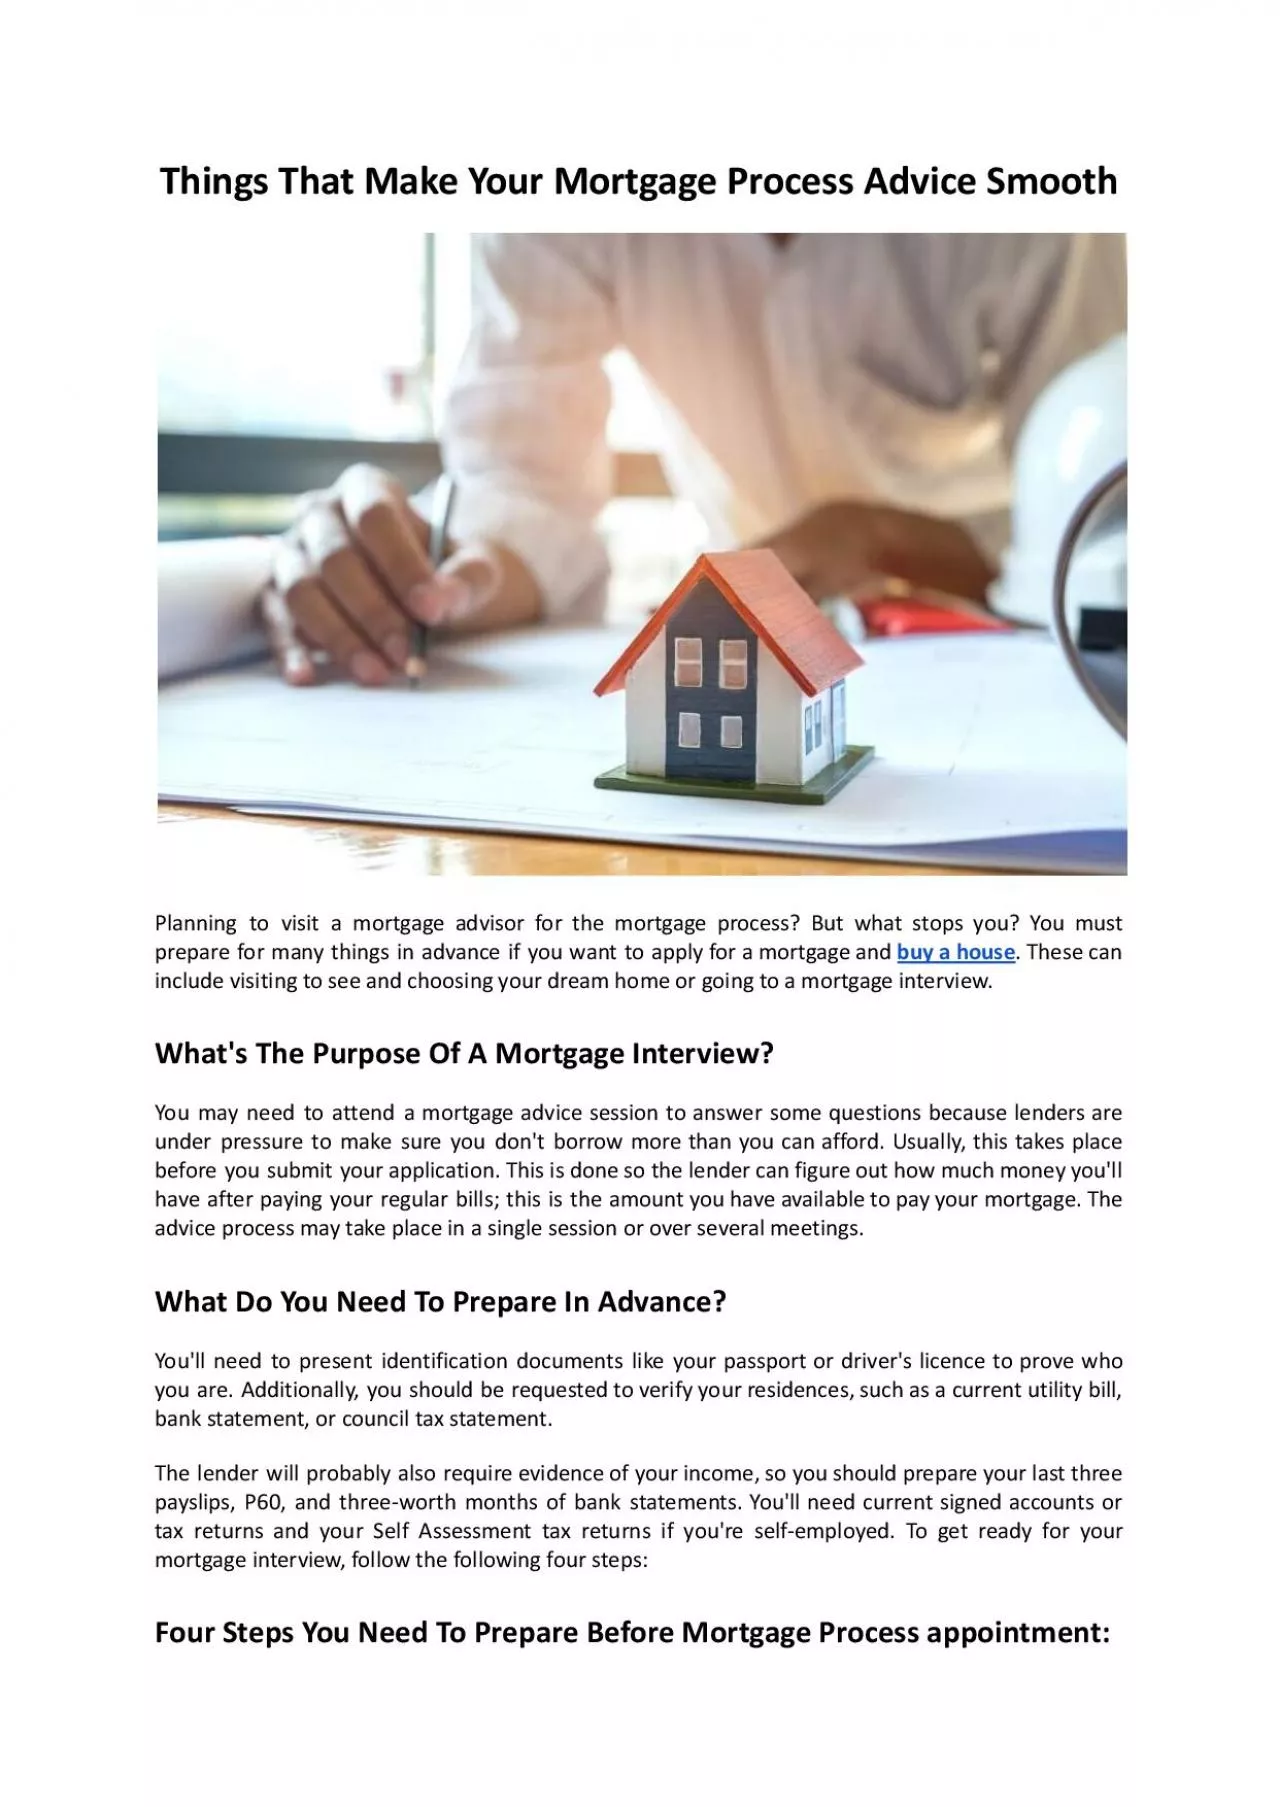 Things That Make Your Mortgage Process Advice Smooth - Mountview Financial Solutions